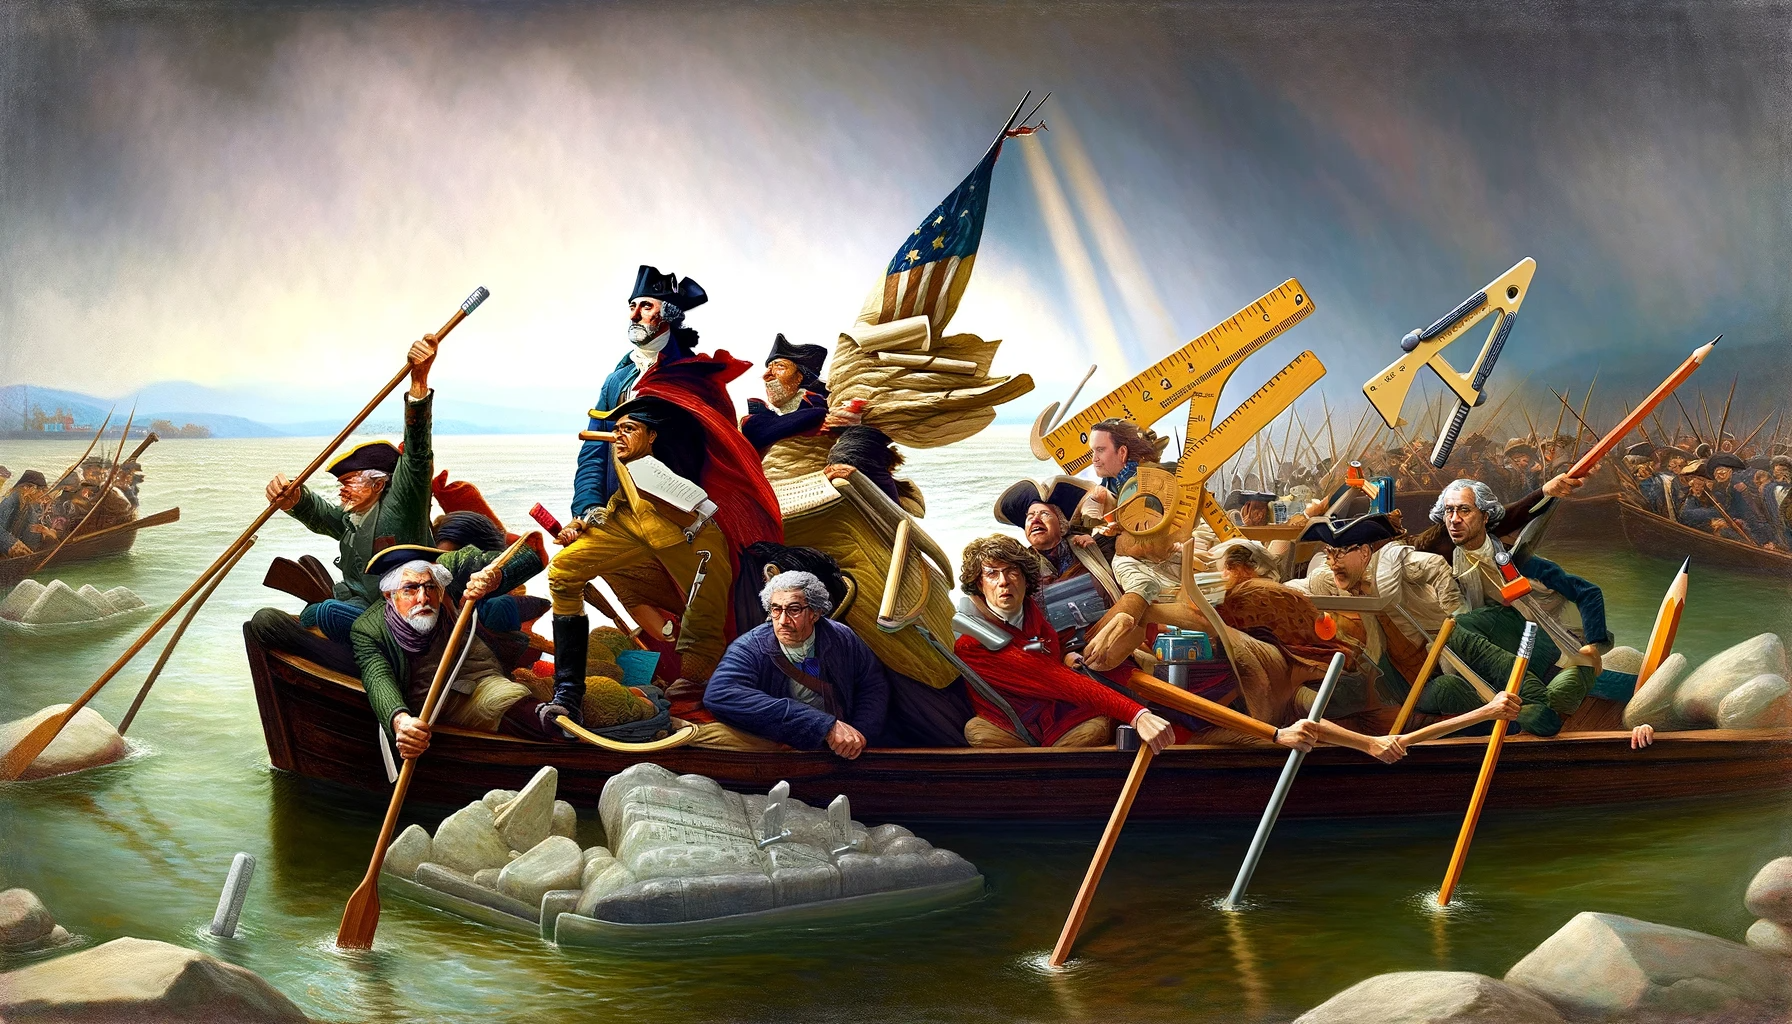 Whimsical reimagining of Washington Crossing the Delaware painting, featuring teachers in stereotypical attire, humorously armed with oversized school supplies like giant rulers and pencils, posing heroically in a boat against an artistic backdrop.